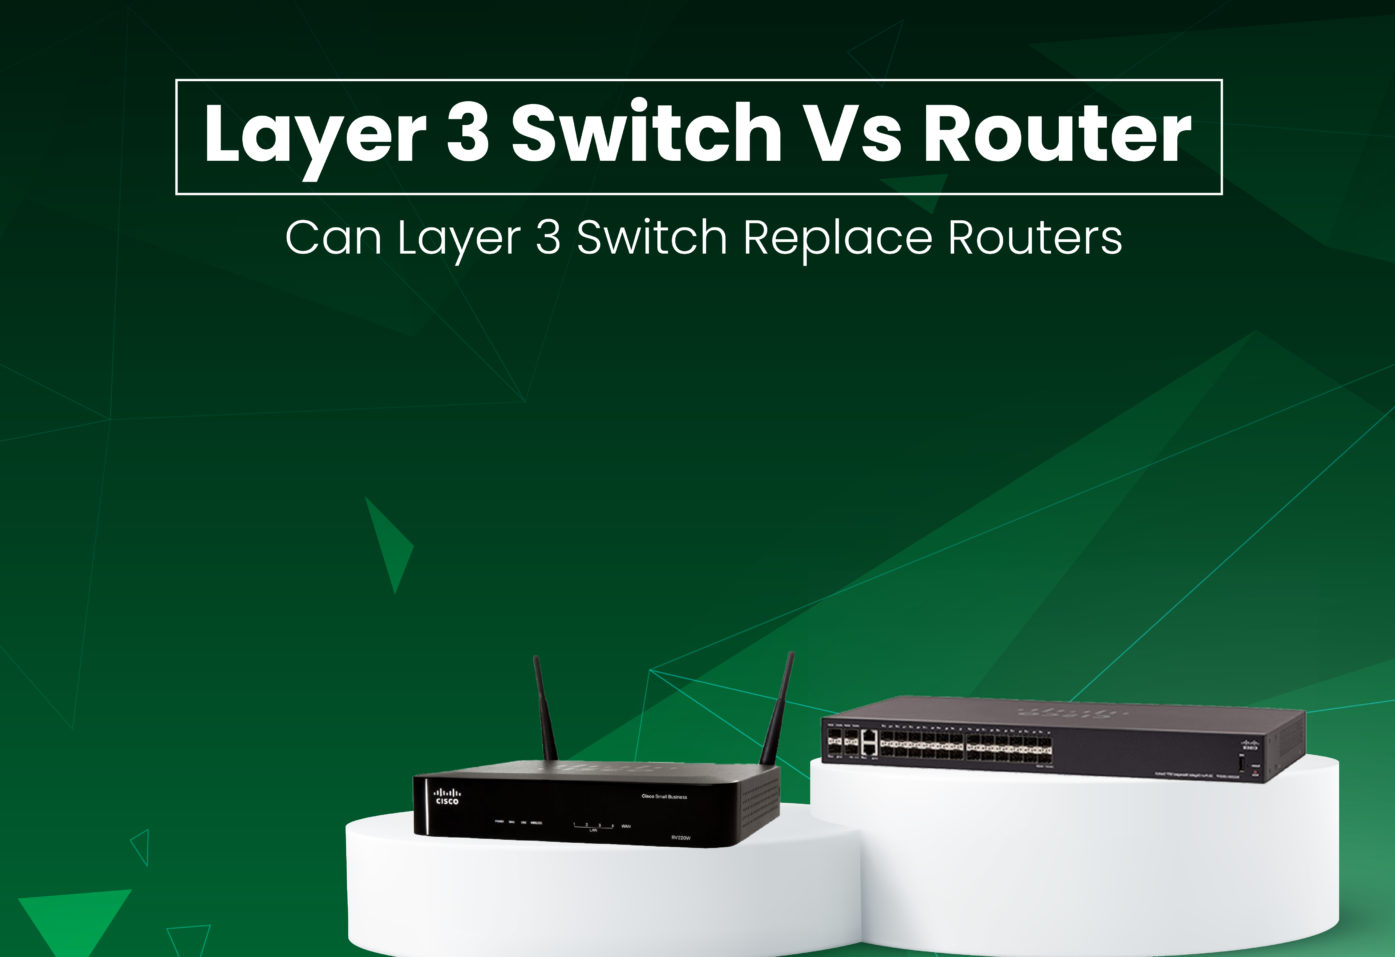 Layer 3 Switch Vs Router Can Layer 3 Switch Replace Routers 01 Gear Net Technologies LLC